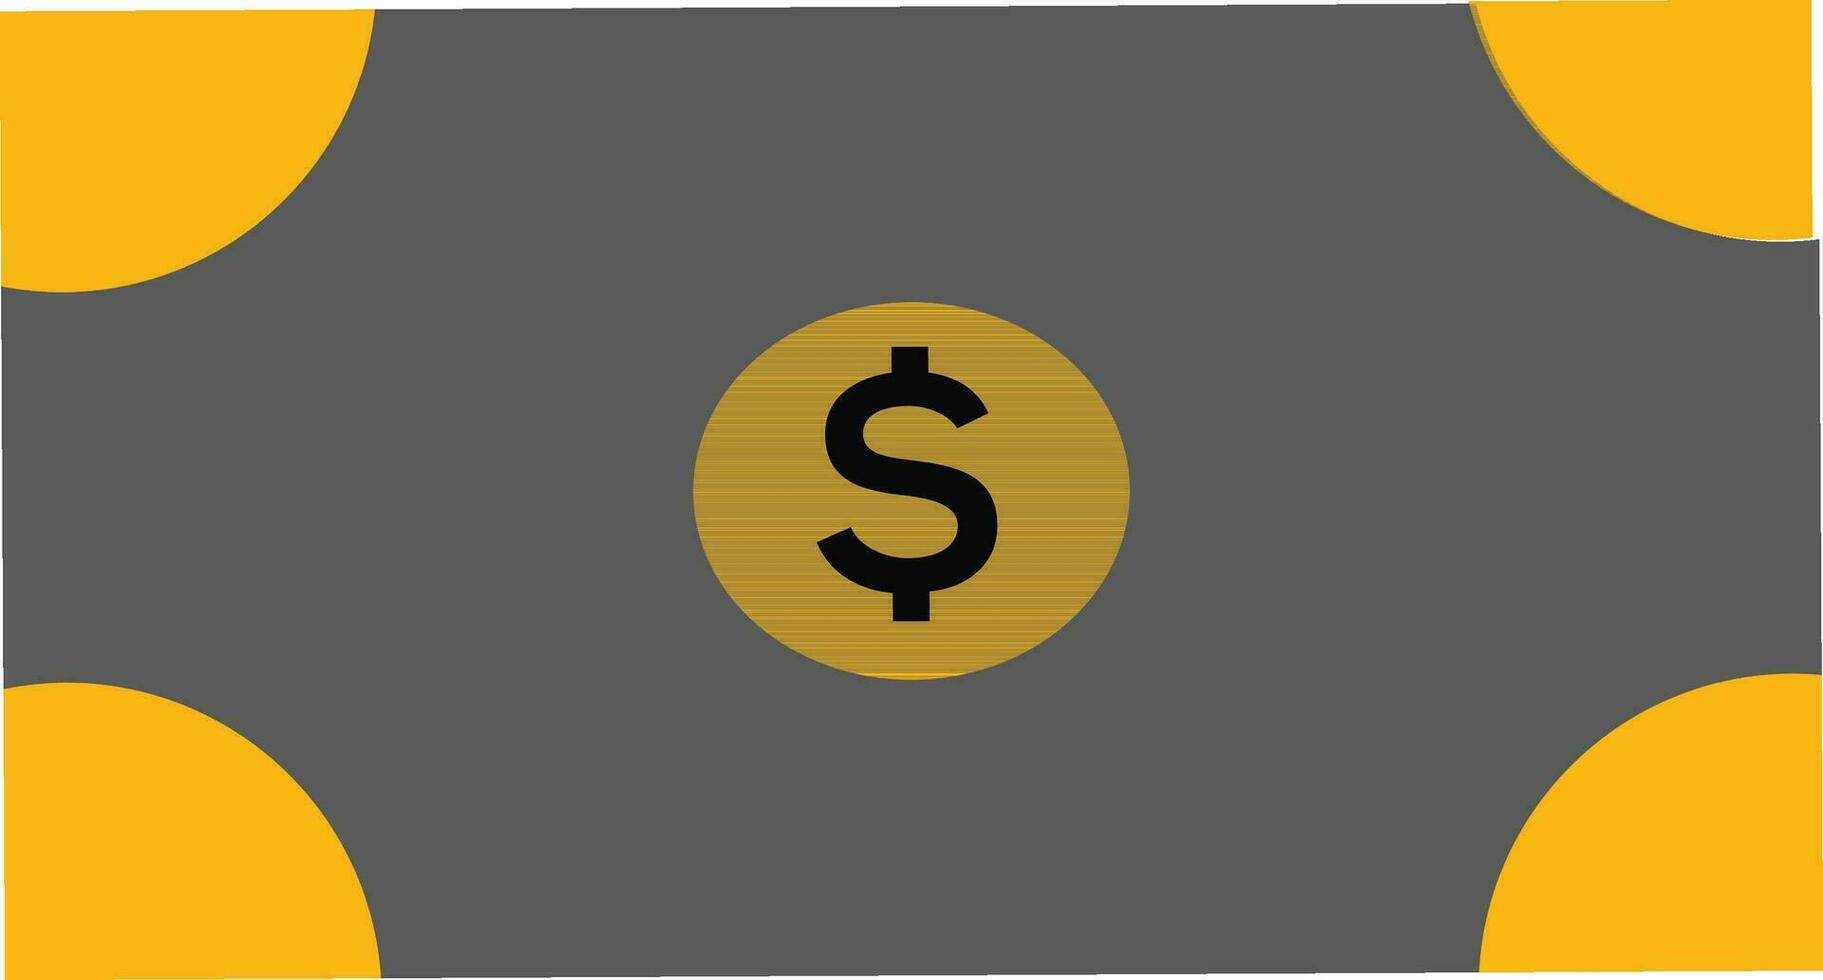 Dollar money icon in yellow and gray color. vector